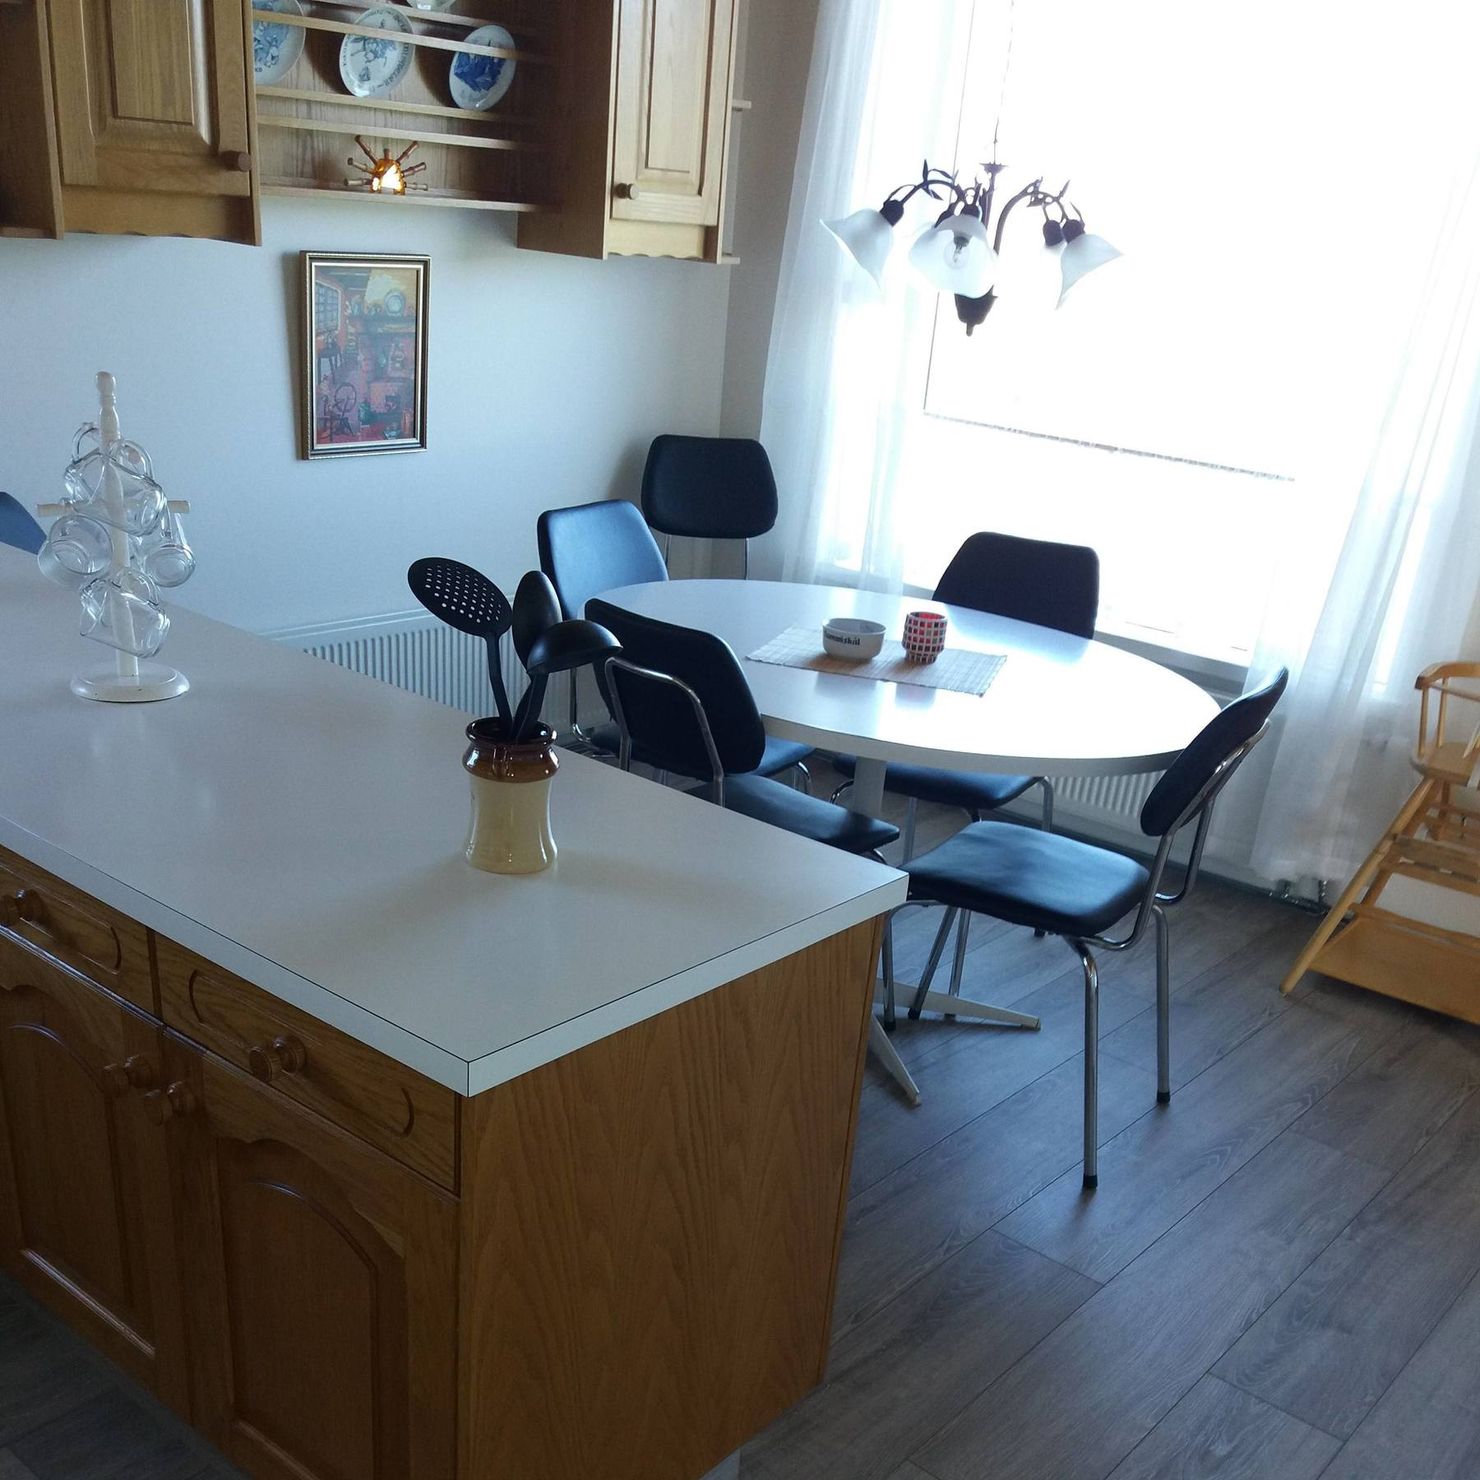 Kitchen counter with dining table. There is also a high chair for the little ones
